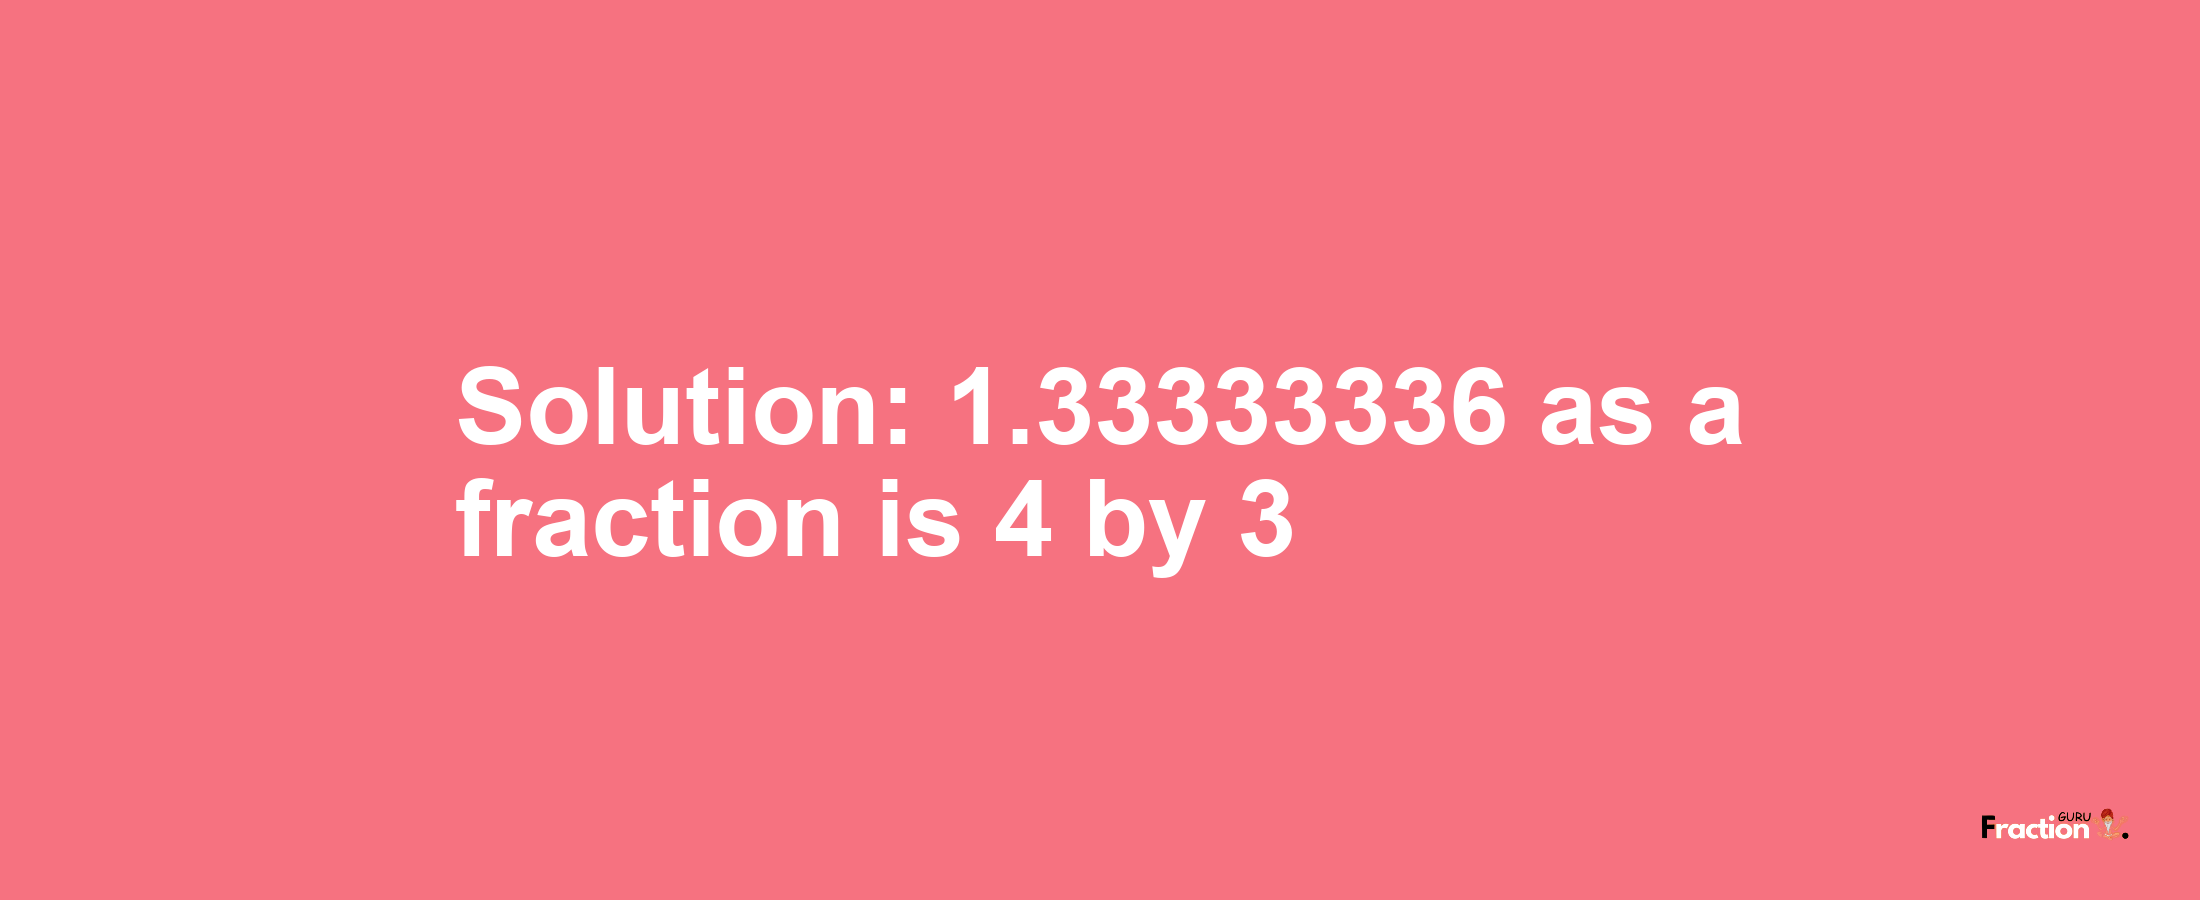 Solution:1.33333336 as a fraction is 4/3